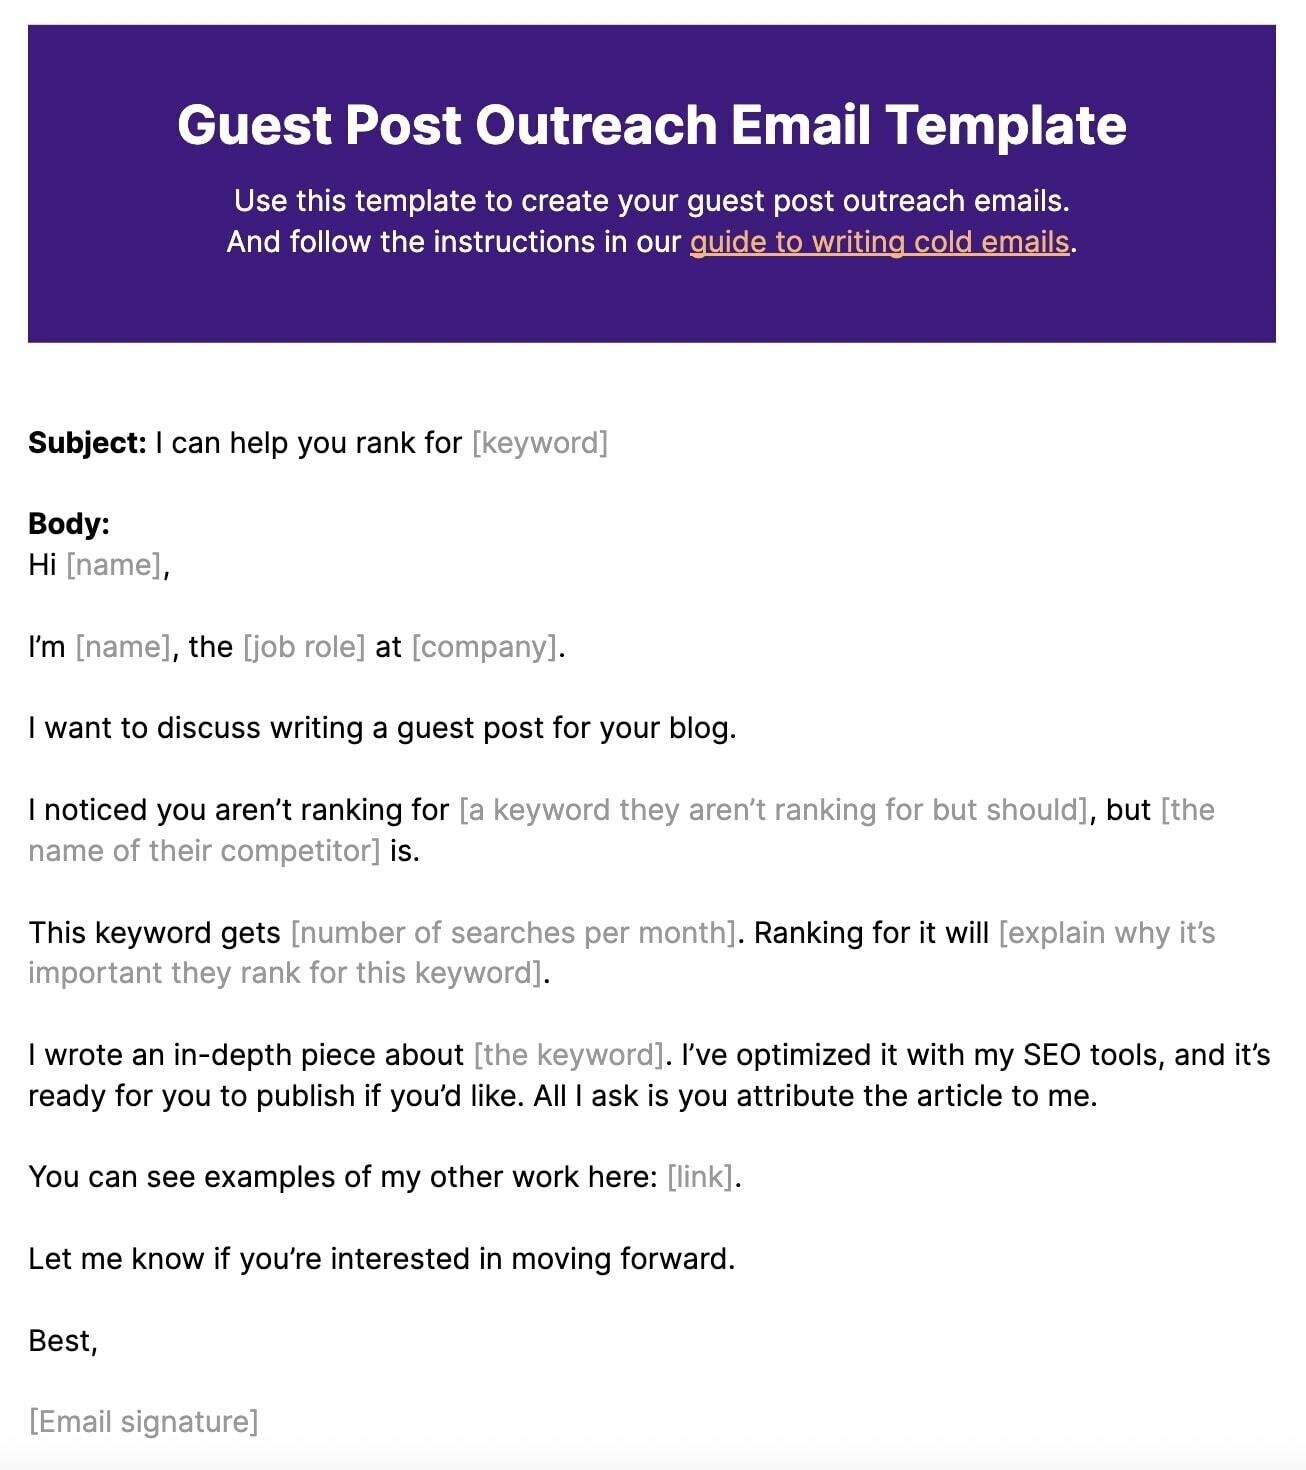 Guest Post Outreach Email Template